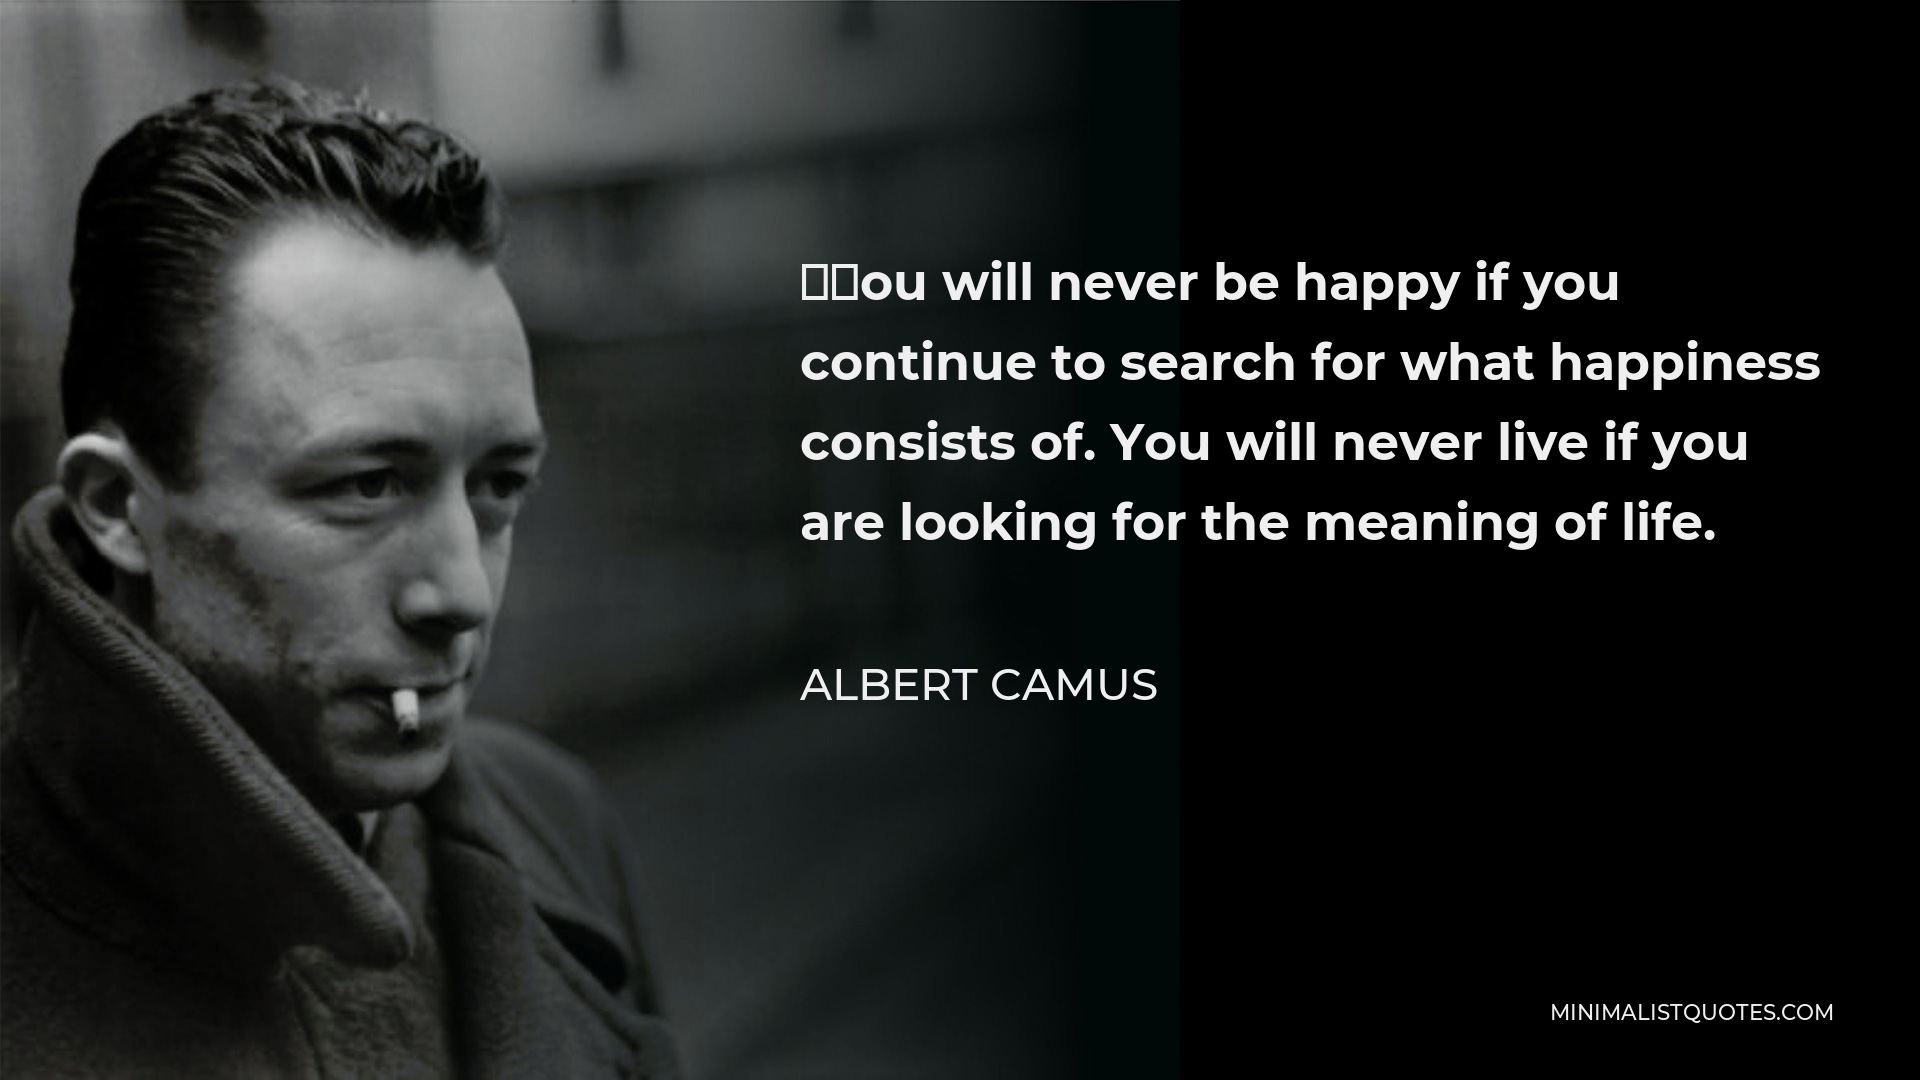 Albert Camus Quote - “You will never be happy if you continue to search for what happiness consists of. You will never live if you are looking for the meaning of life.